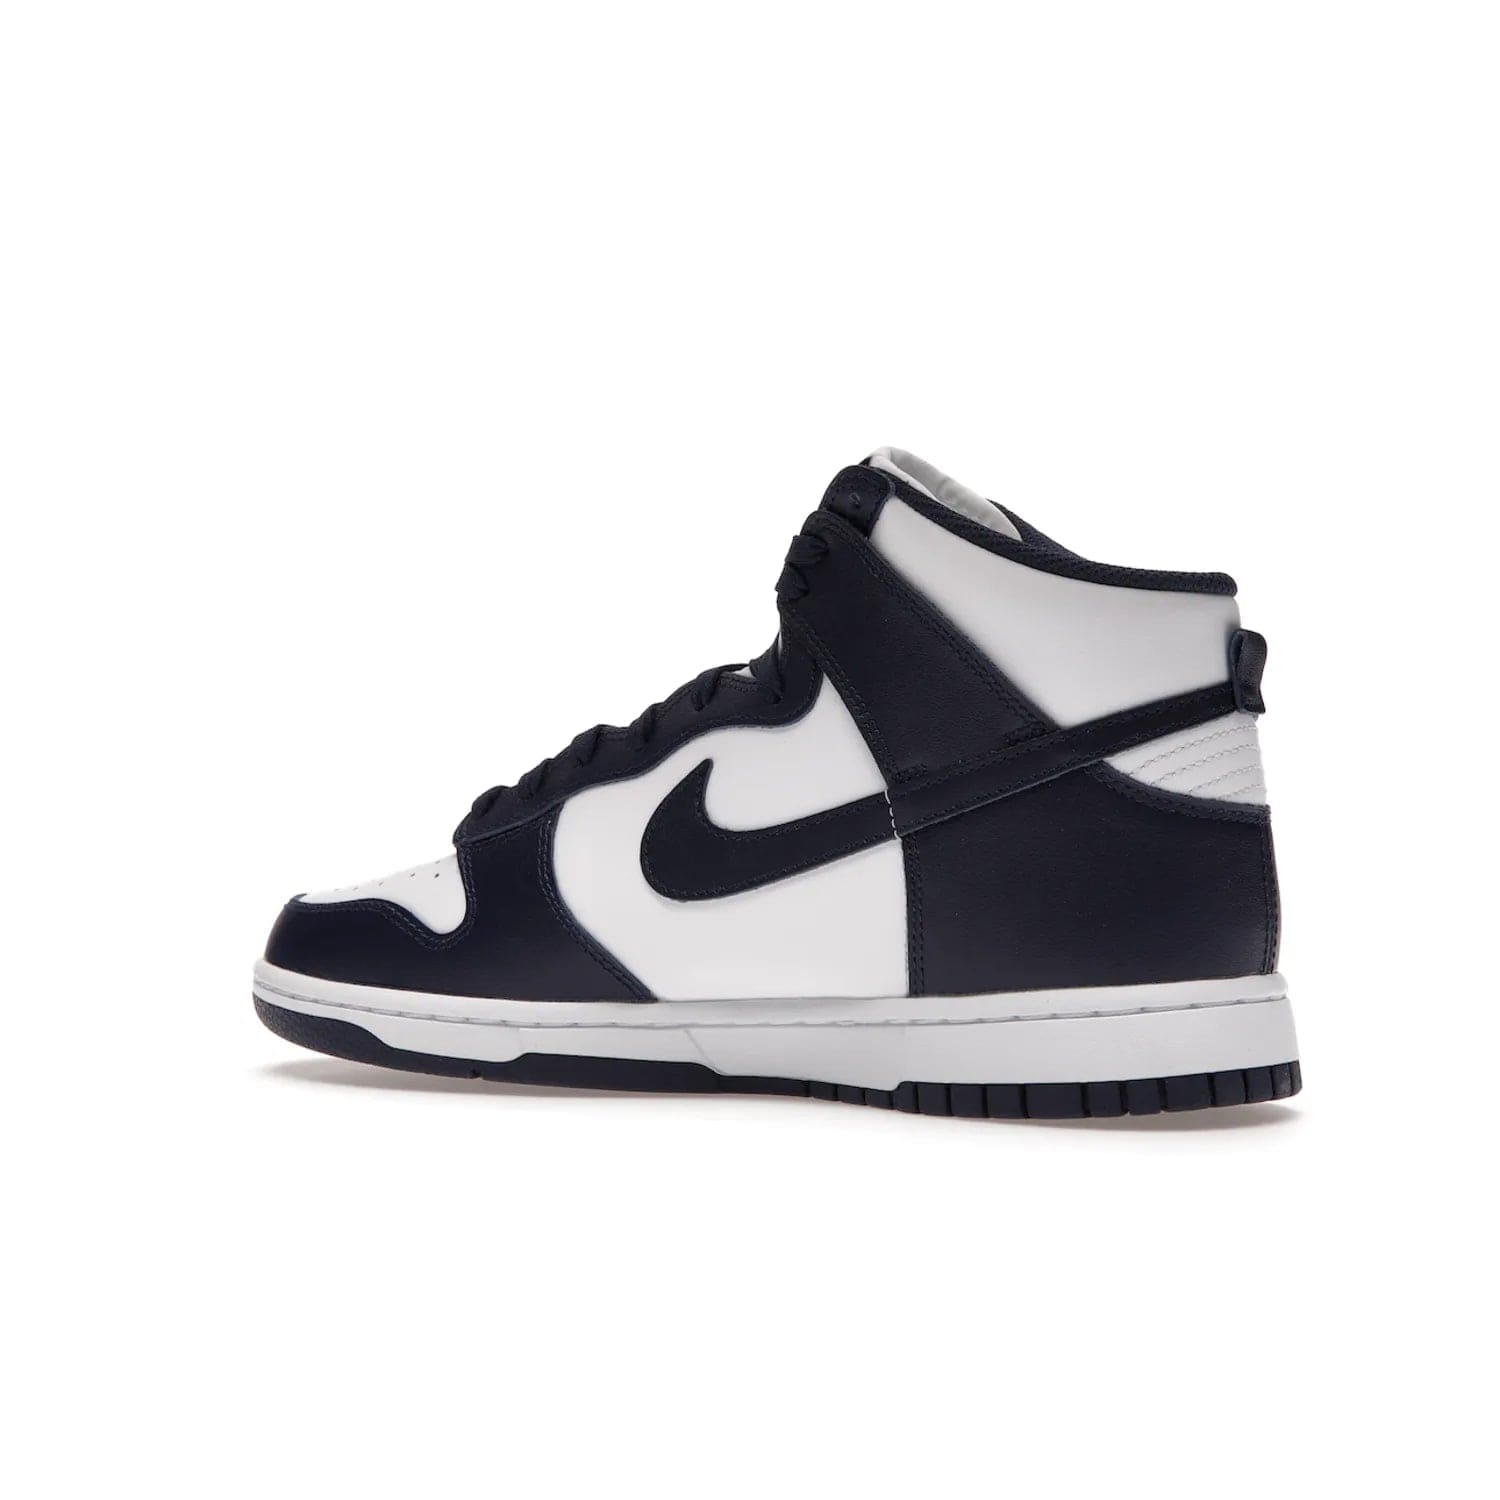 Nike Dunk High Championship Navy - Image 22 - Only at www.BallersClubKickz.com - Classic Nike Dunk High sneaker delivers an unforgettable style with white leather upper, Championship Navy overlays, and matching woven tongue label and sole. Make a statement with the Championship Navy today.